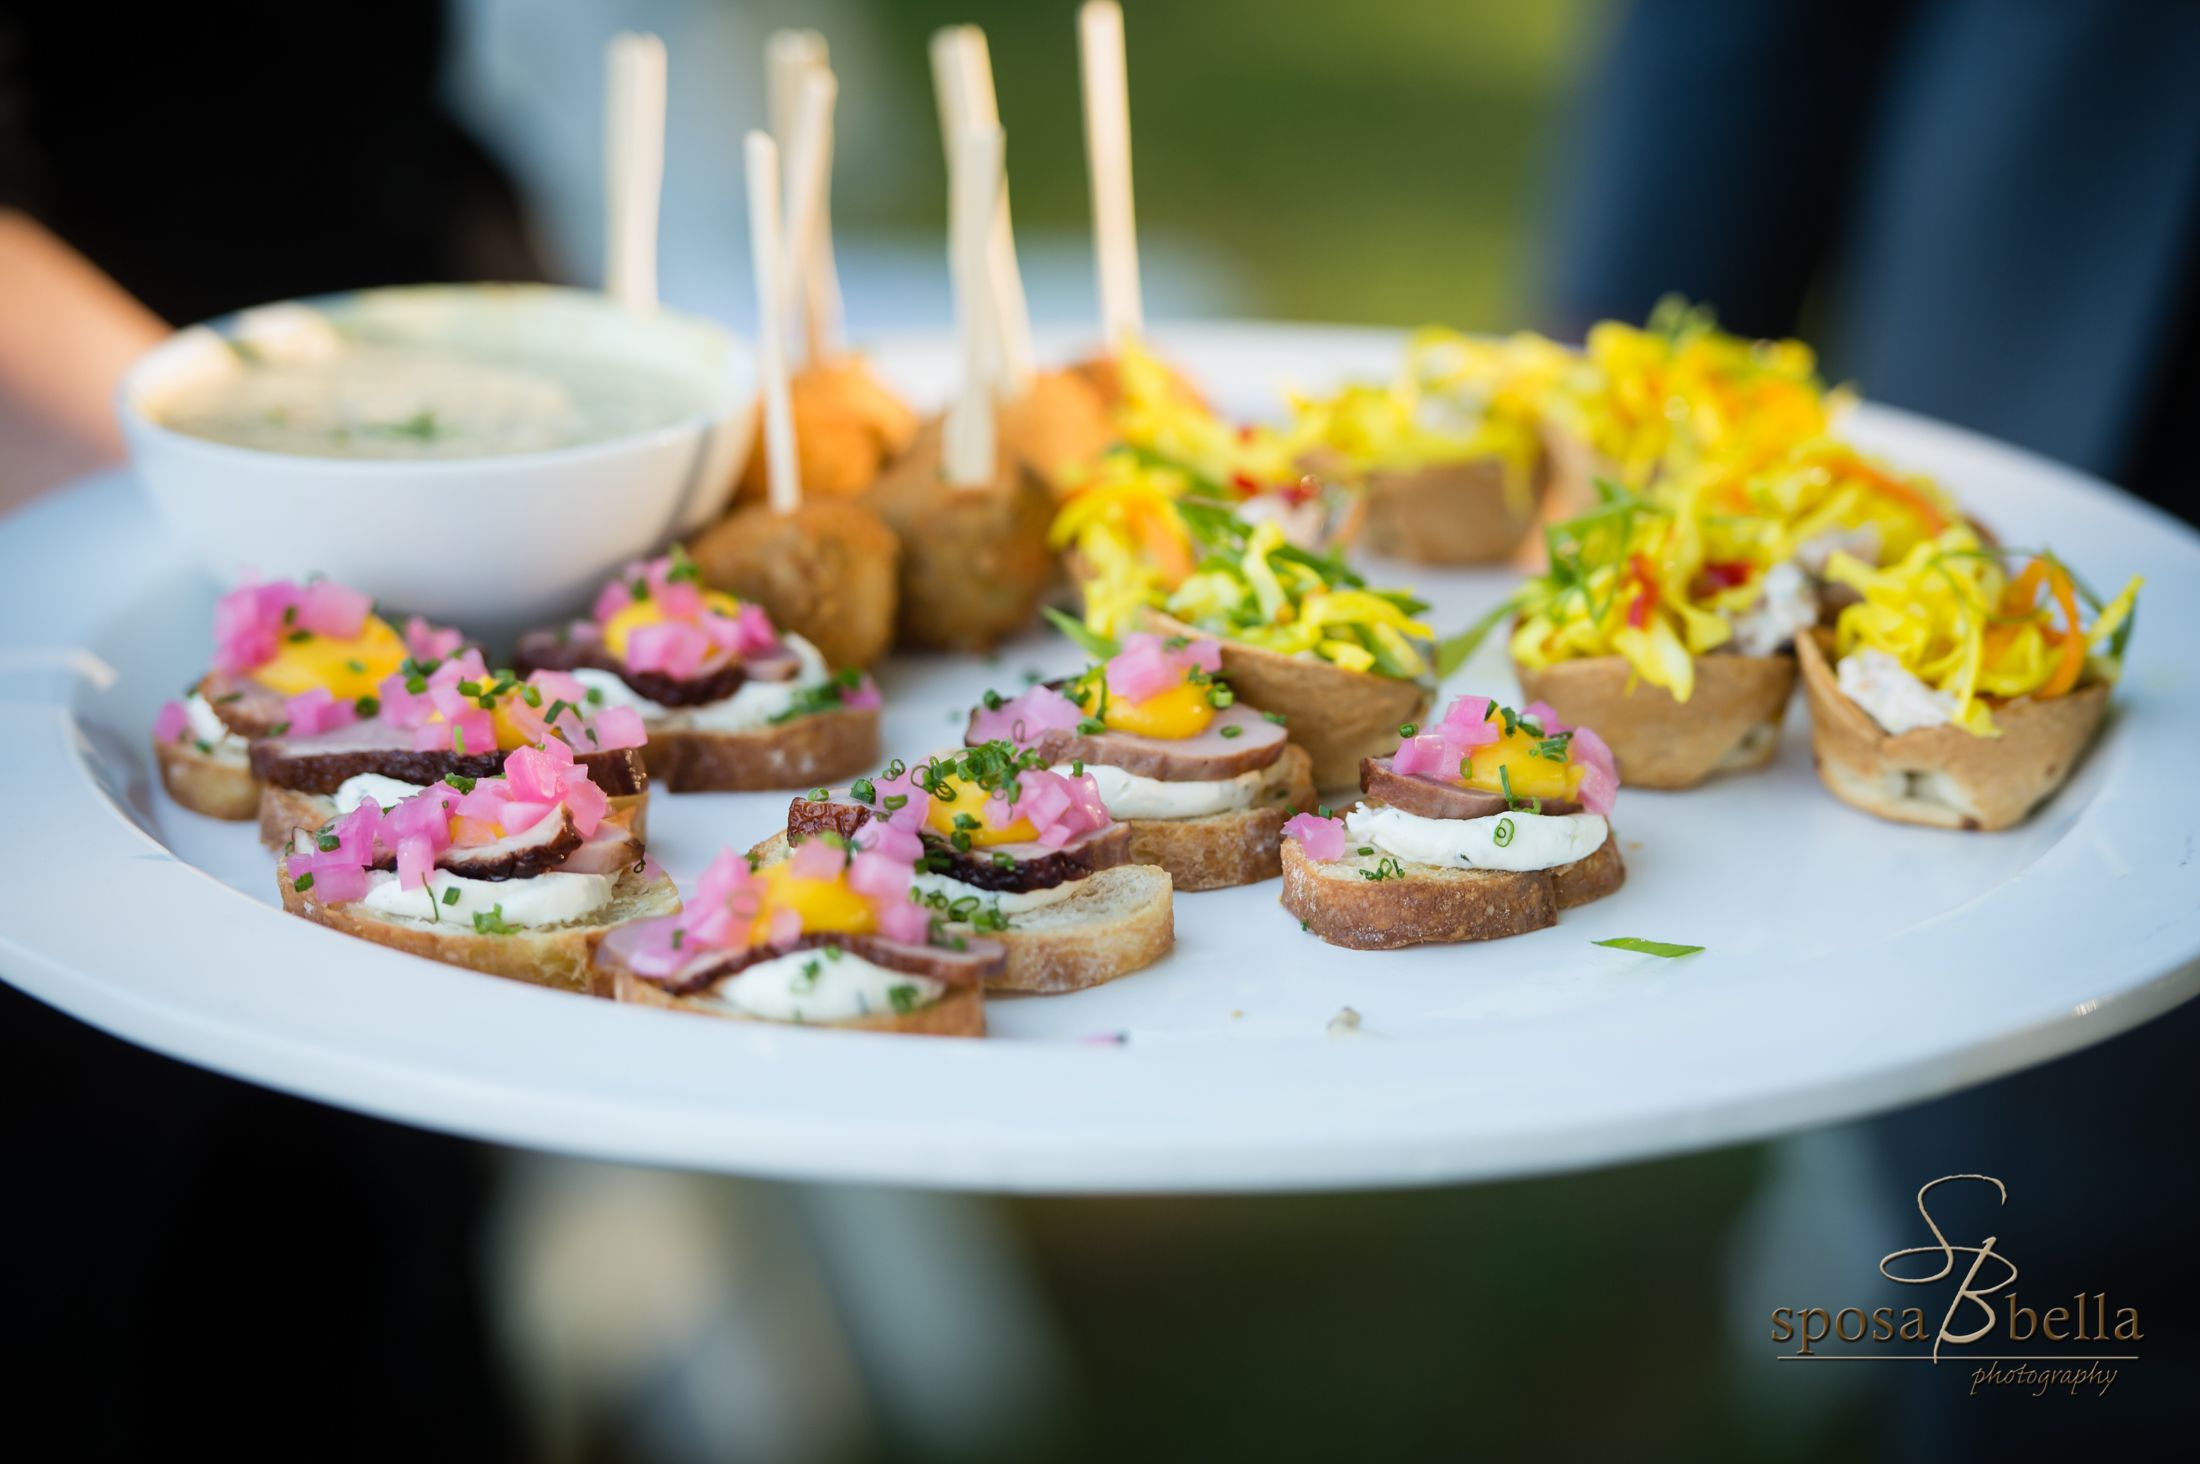  The Farm has inhouse catering services to provide couples unique food options that will delight their guests. 